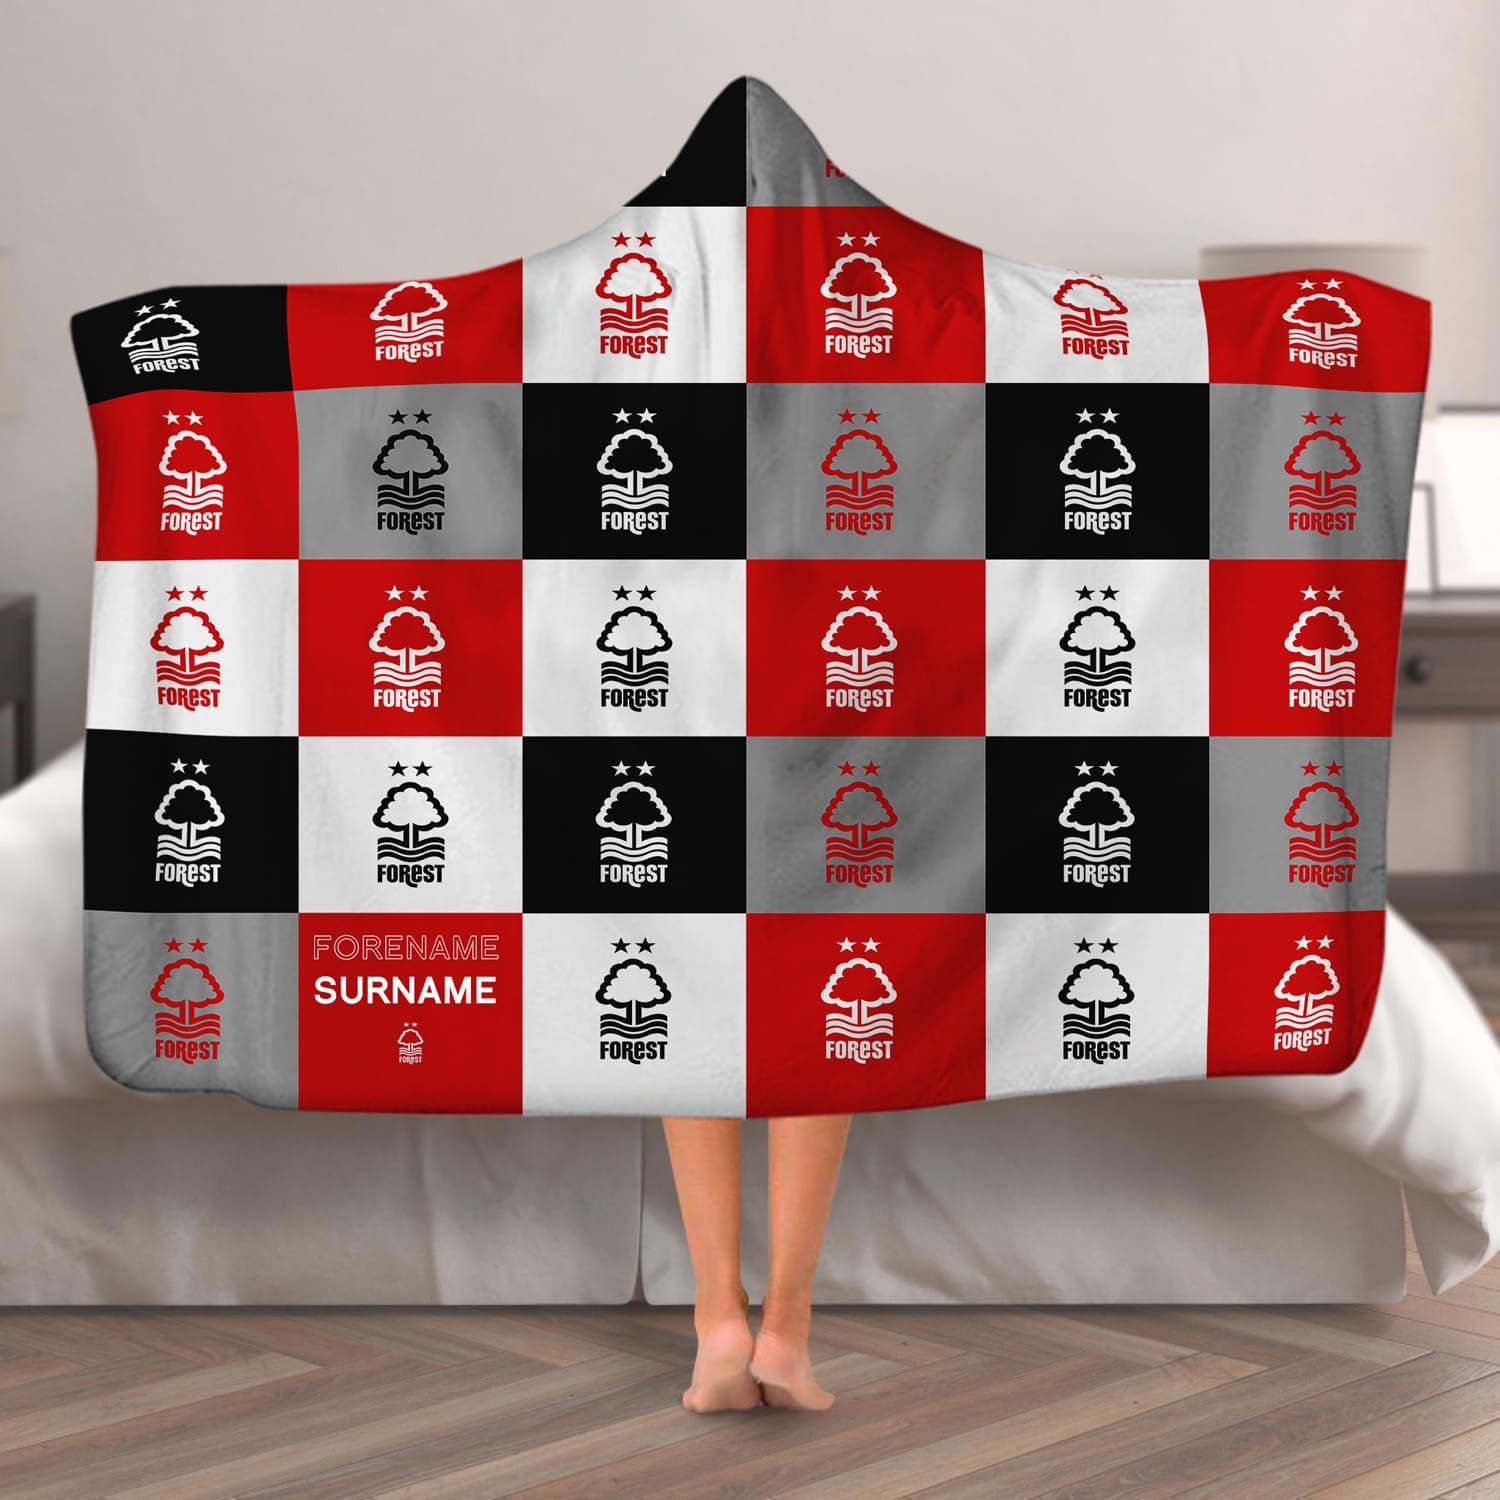 Nottingham Forest FC - Chequered Adult Hooded Fleece Blanket - Officially Licenced